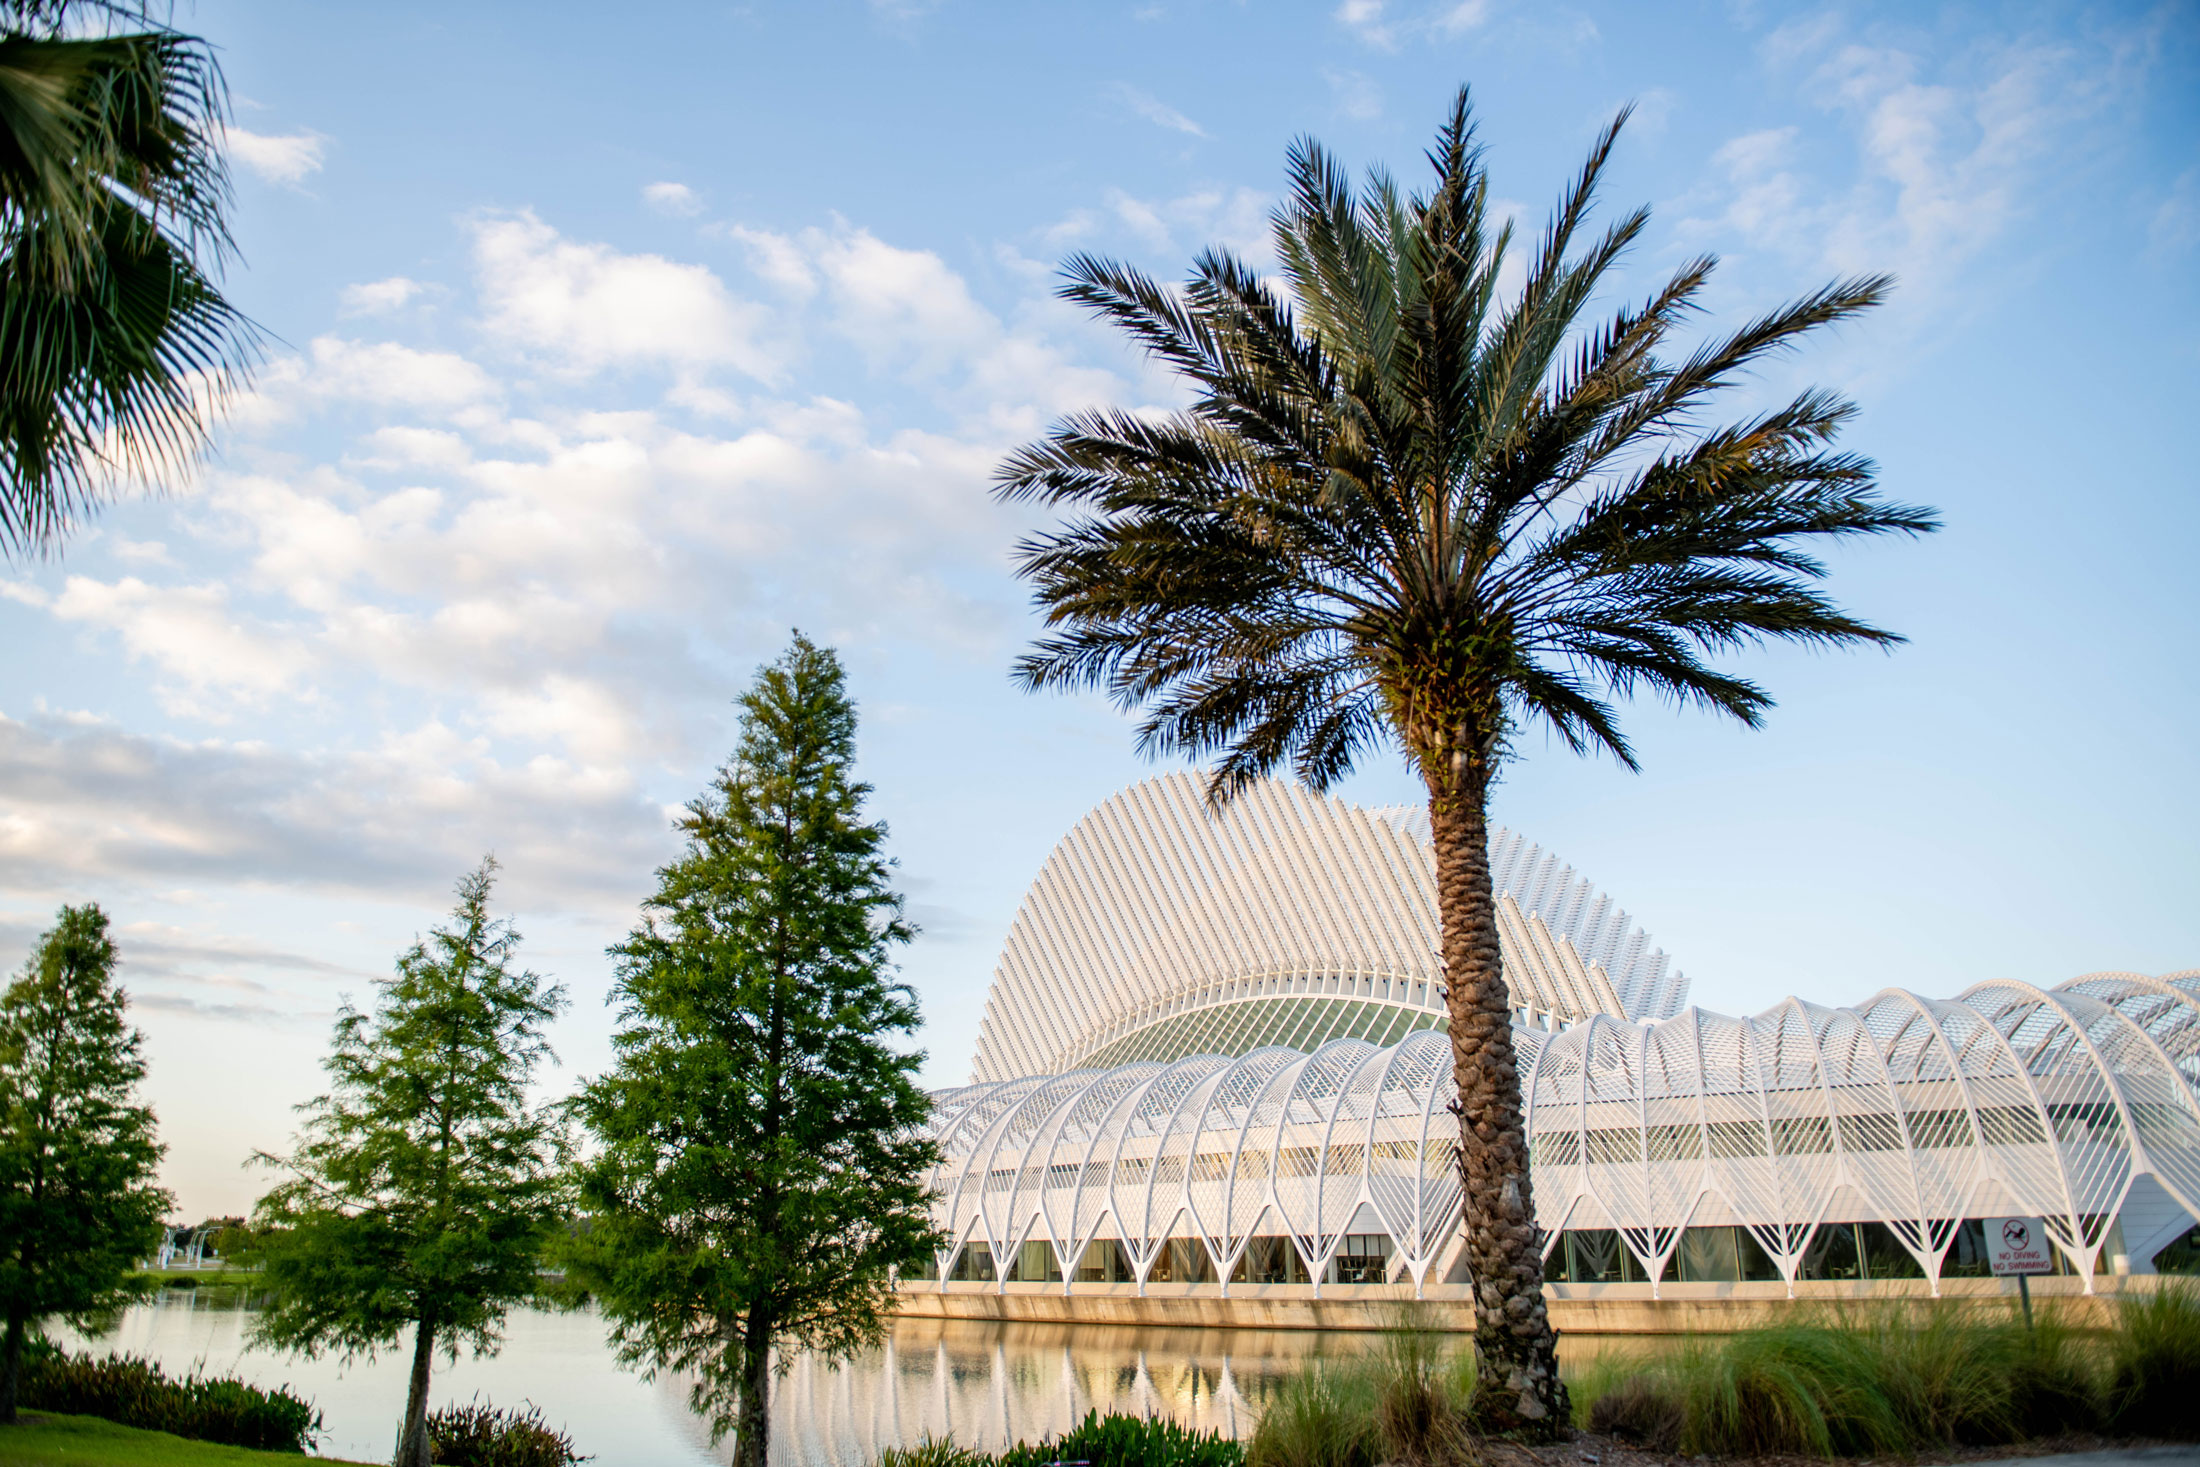 Florida Polytechnic University is ranked the number one public college in the South by U.S. News and World Report.